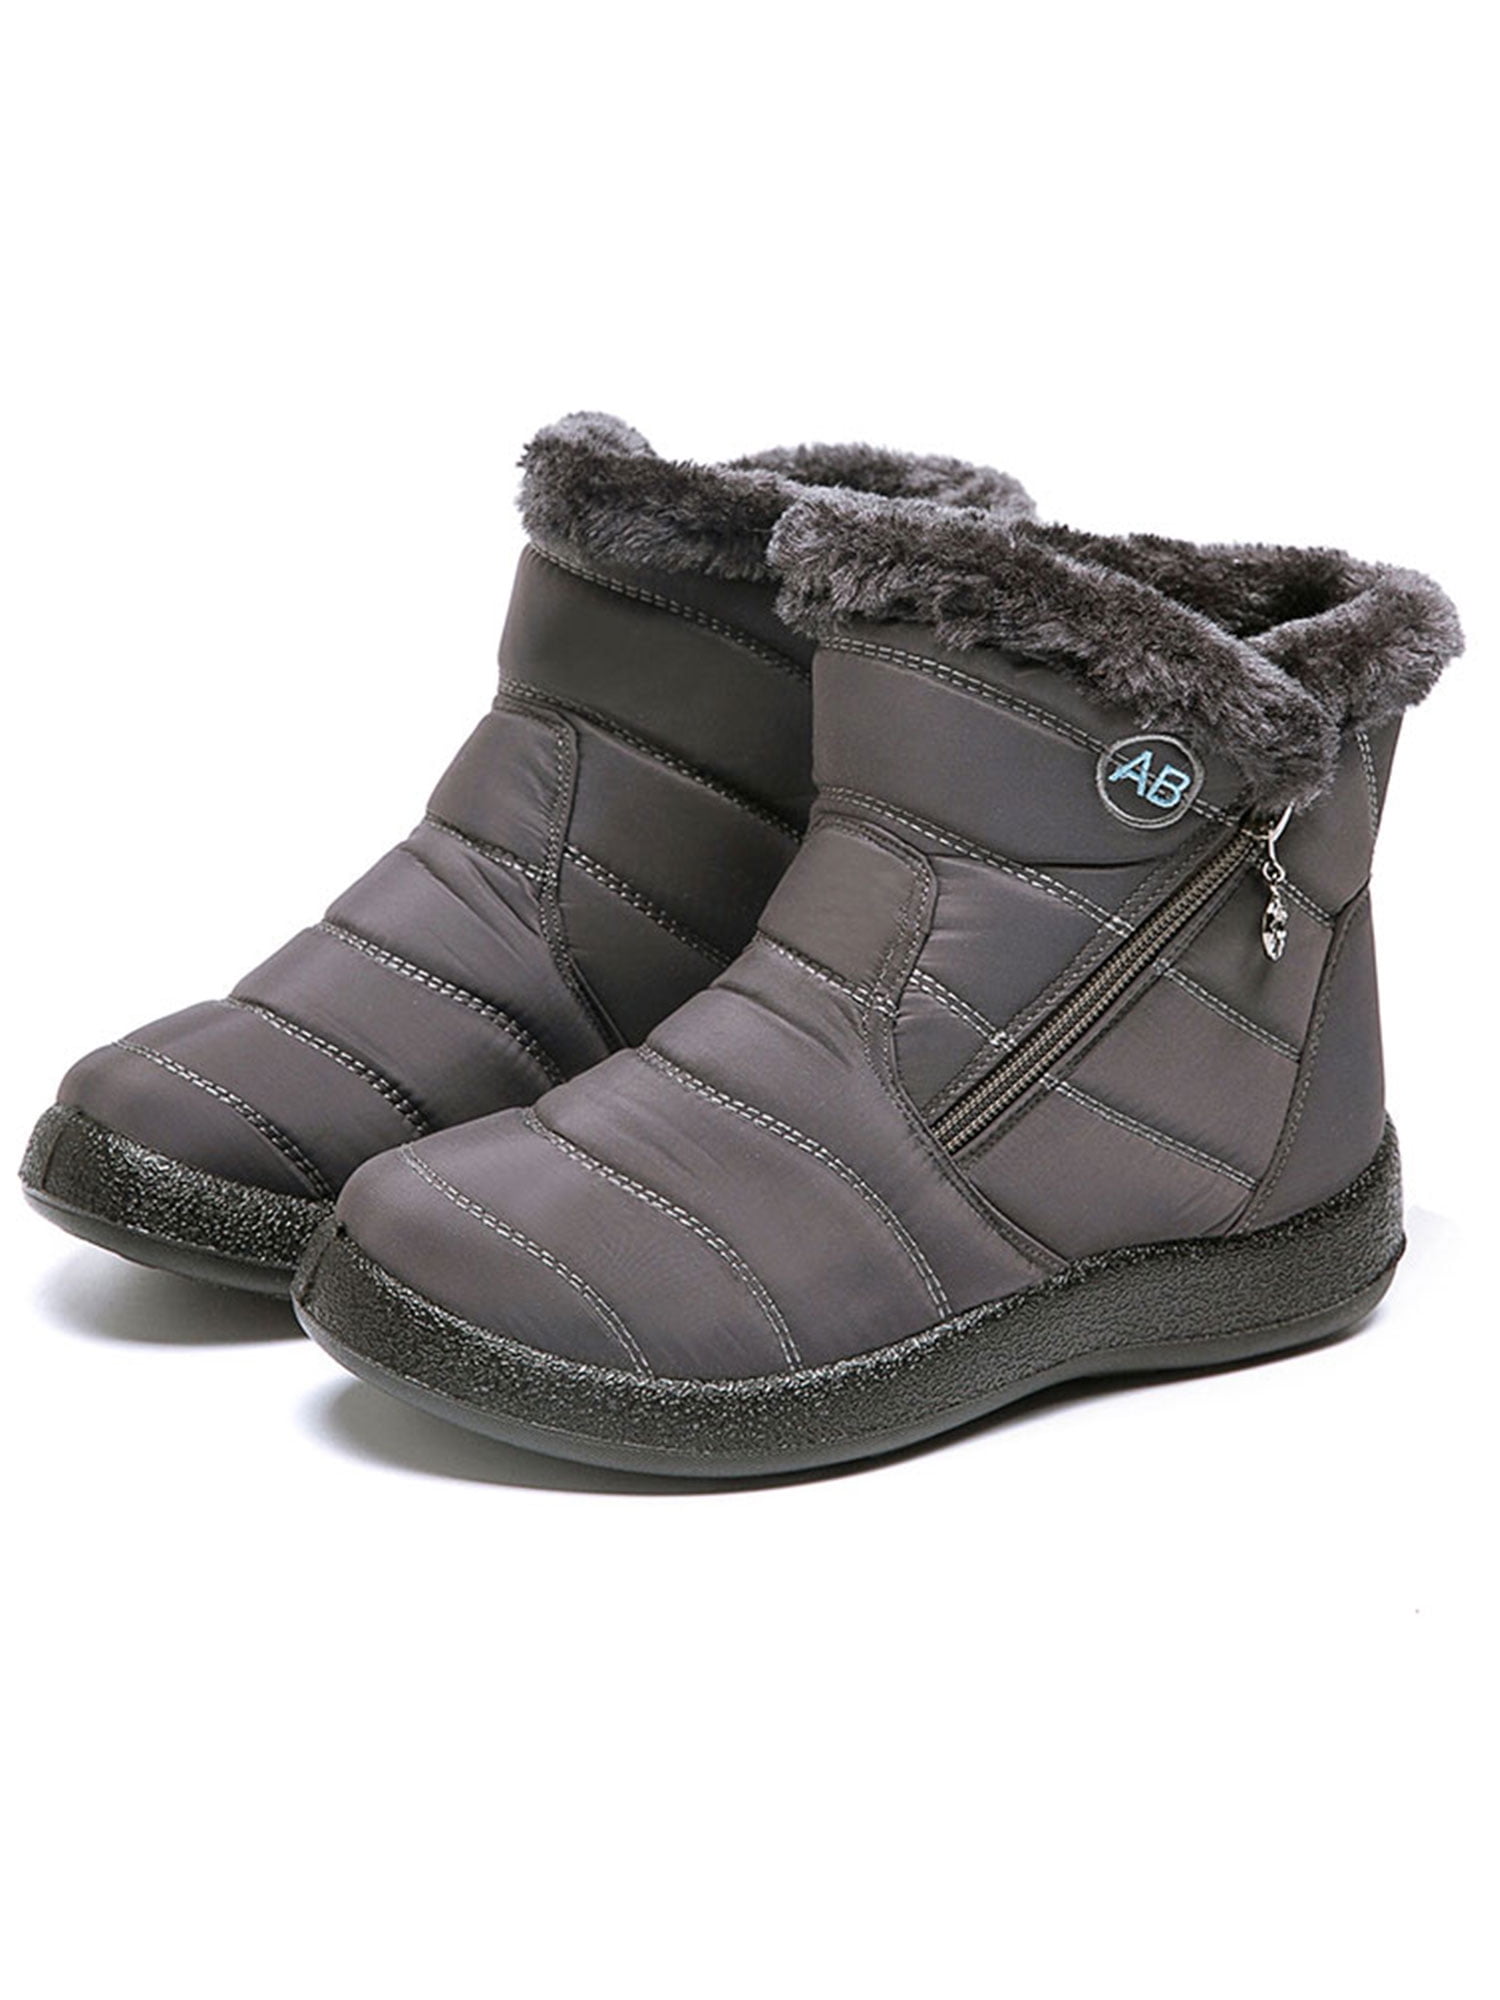 Details about   Sweet Women Outdoor Round Toe Warm Lining Zip Up Furry Block Heel Ankle Boots D 